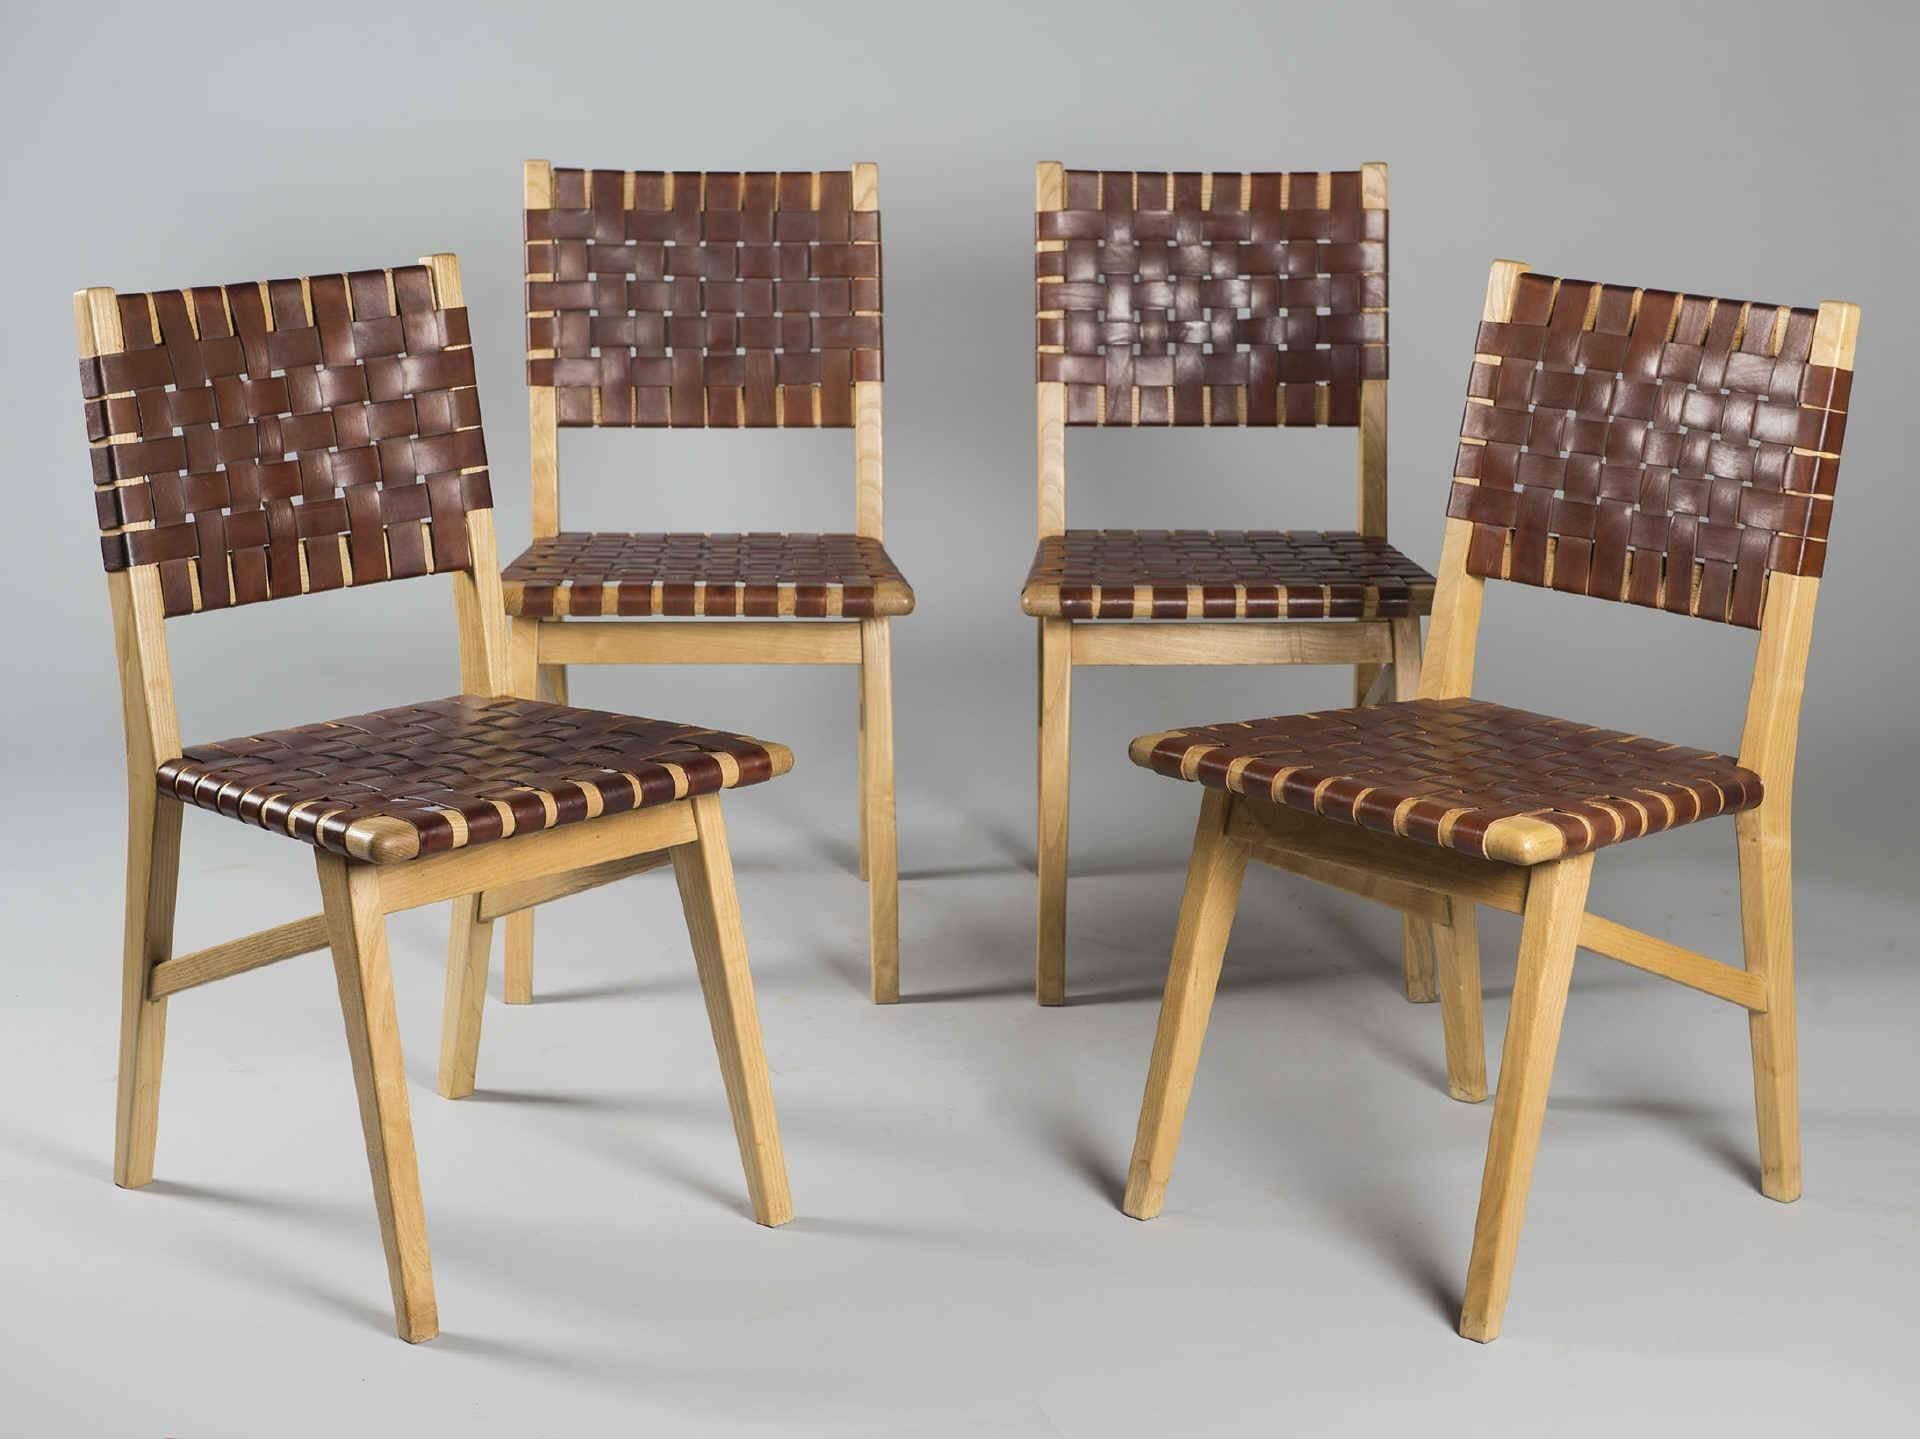 Set of four side chairs by Jacques Adnet - 'Compagnie des Arts Francais' leather and ash tree. Circa 1940.